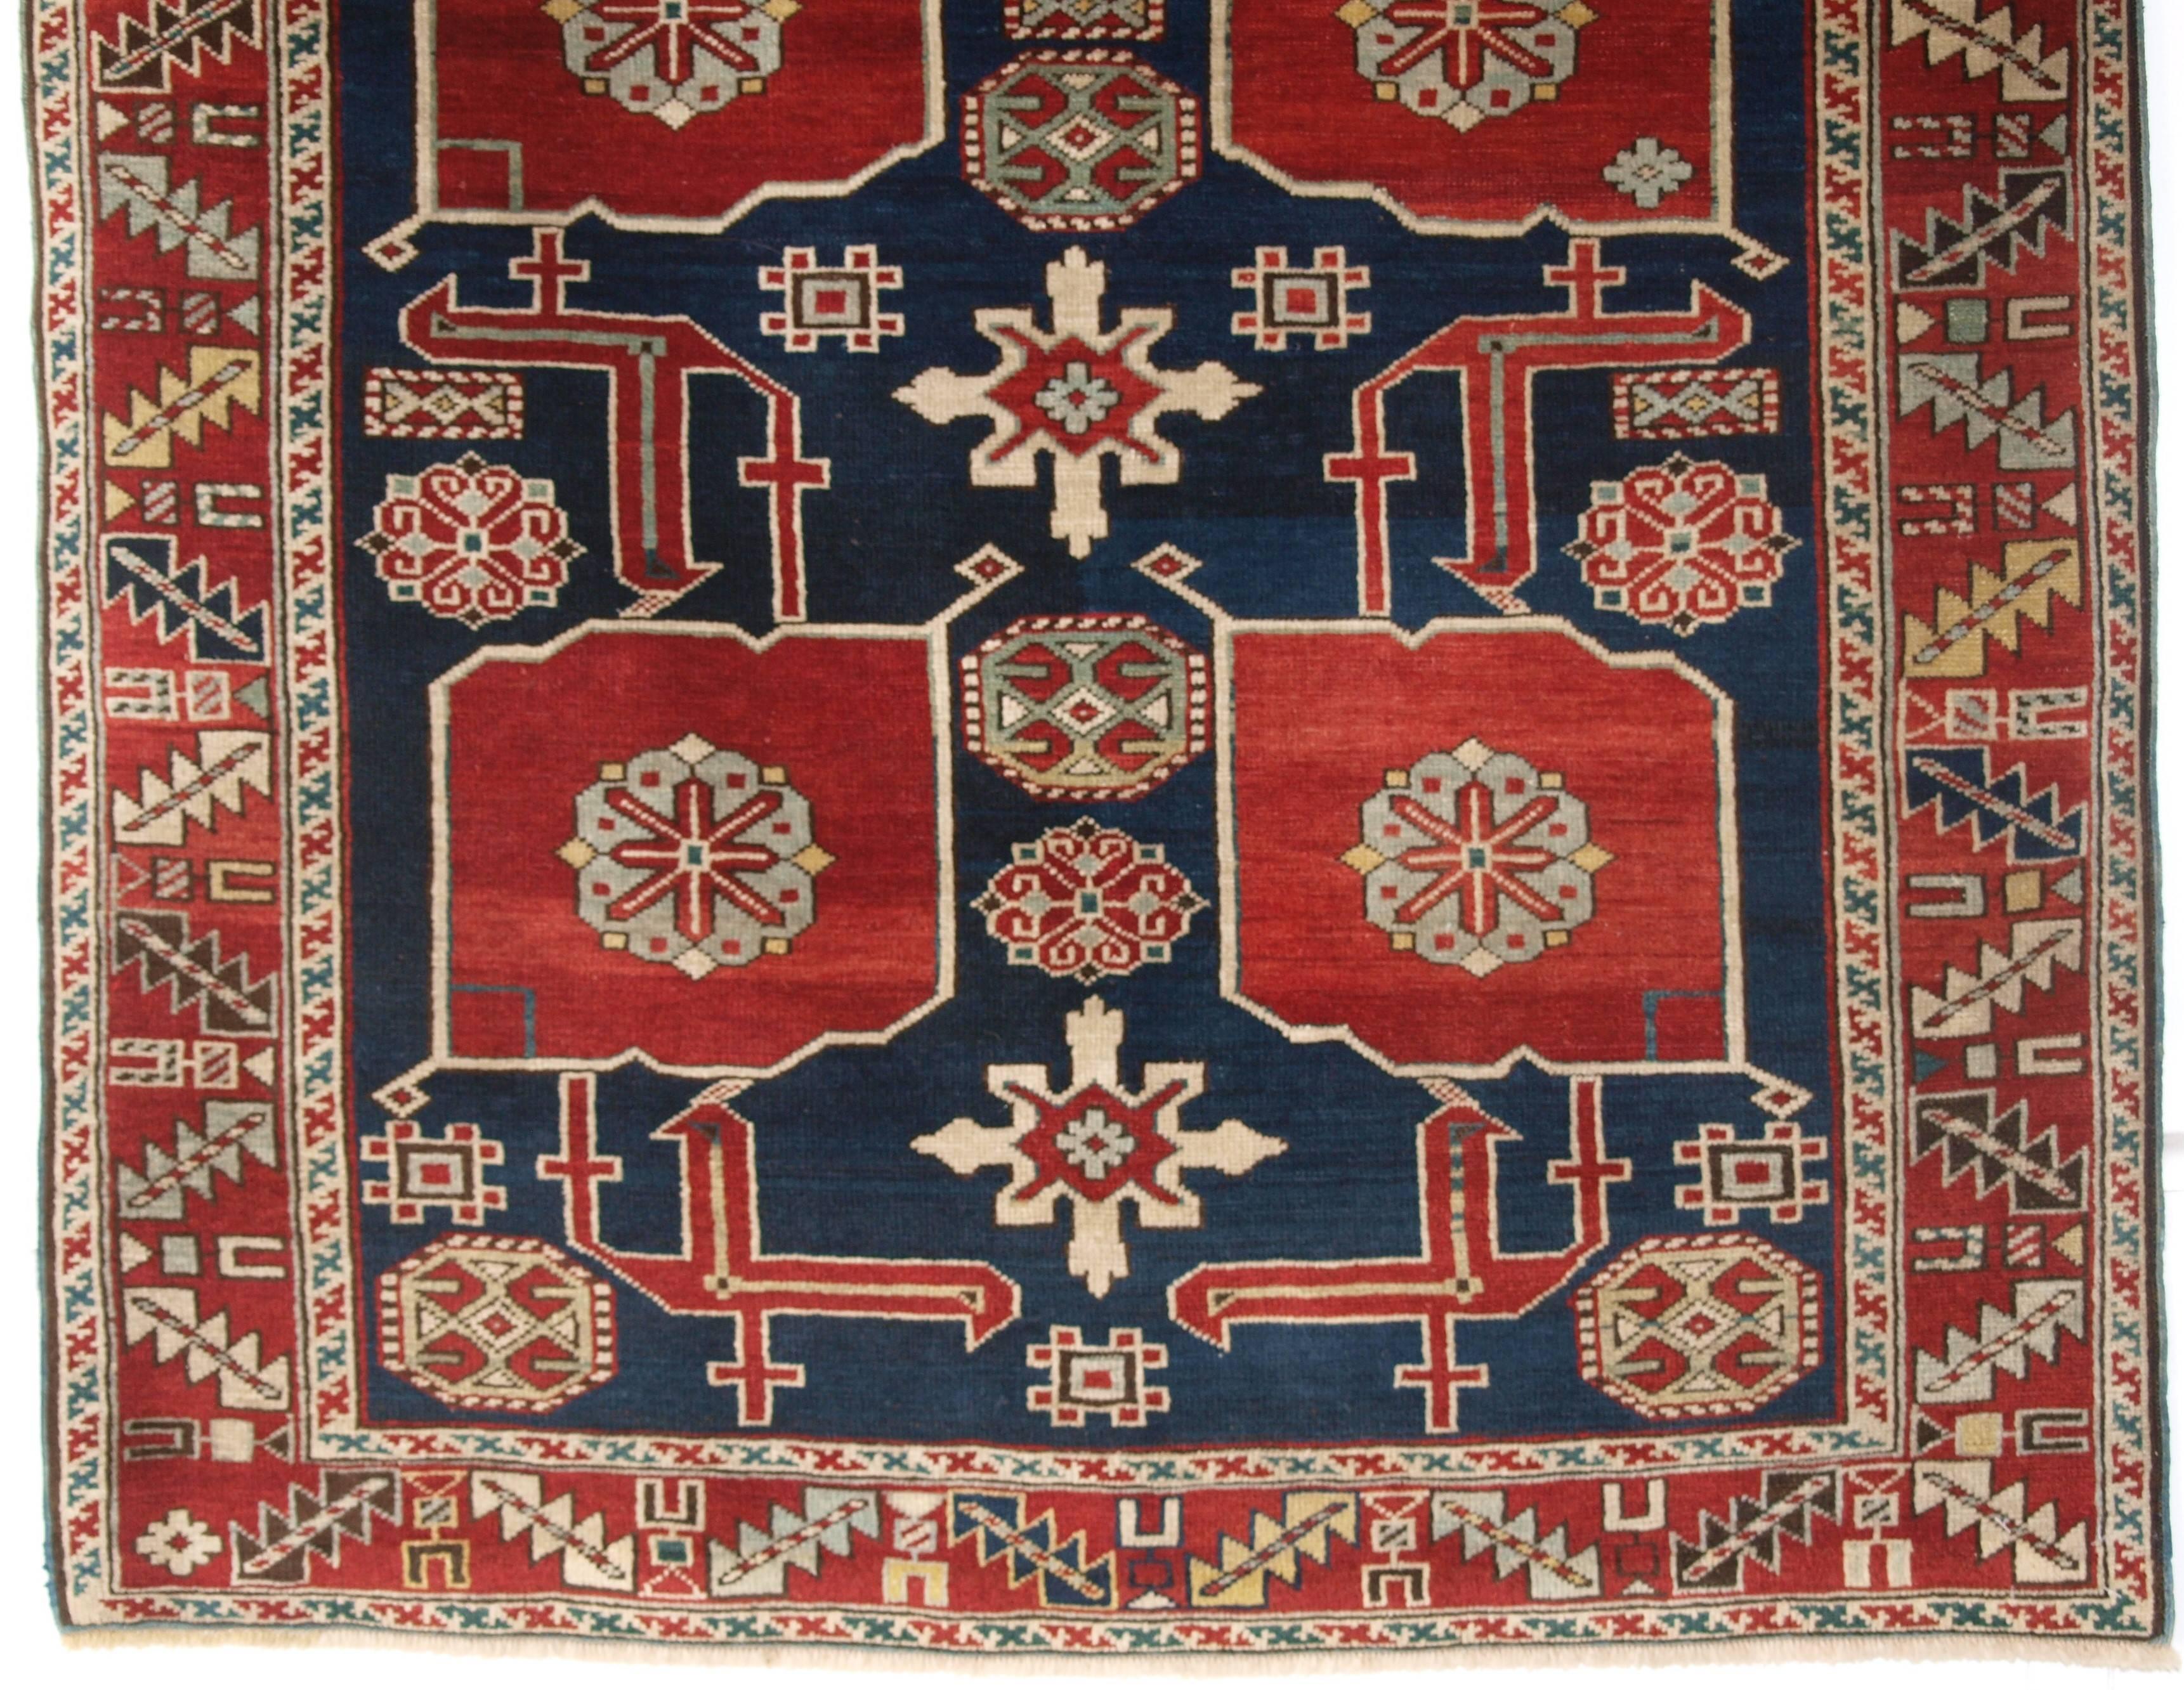 Size: 4ft 9in x 3ft 0in (145 x 91cm).

Antique Caucasian Kuba rug from the village of Karagashlim, 

circa 1890.

The rug is a very well-drawn example of this classic Caucasian design. The deep indigo field with palmettes, dragons, snow flakes